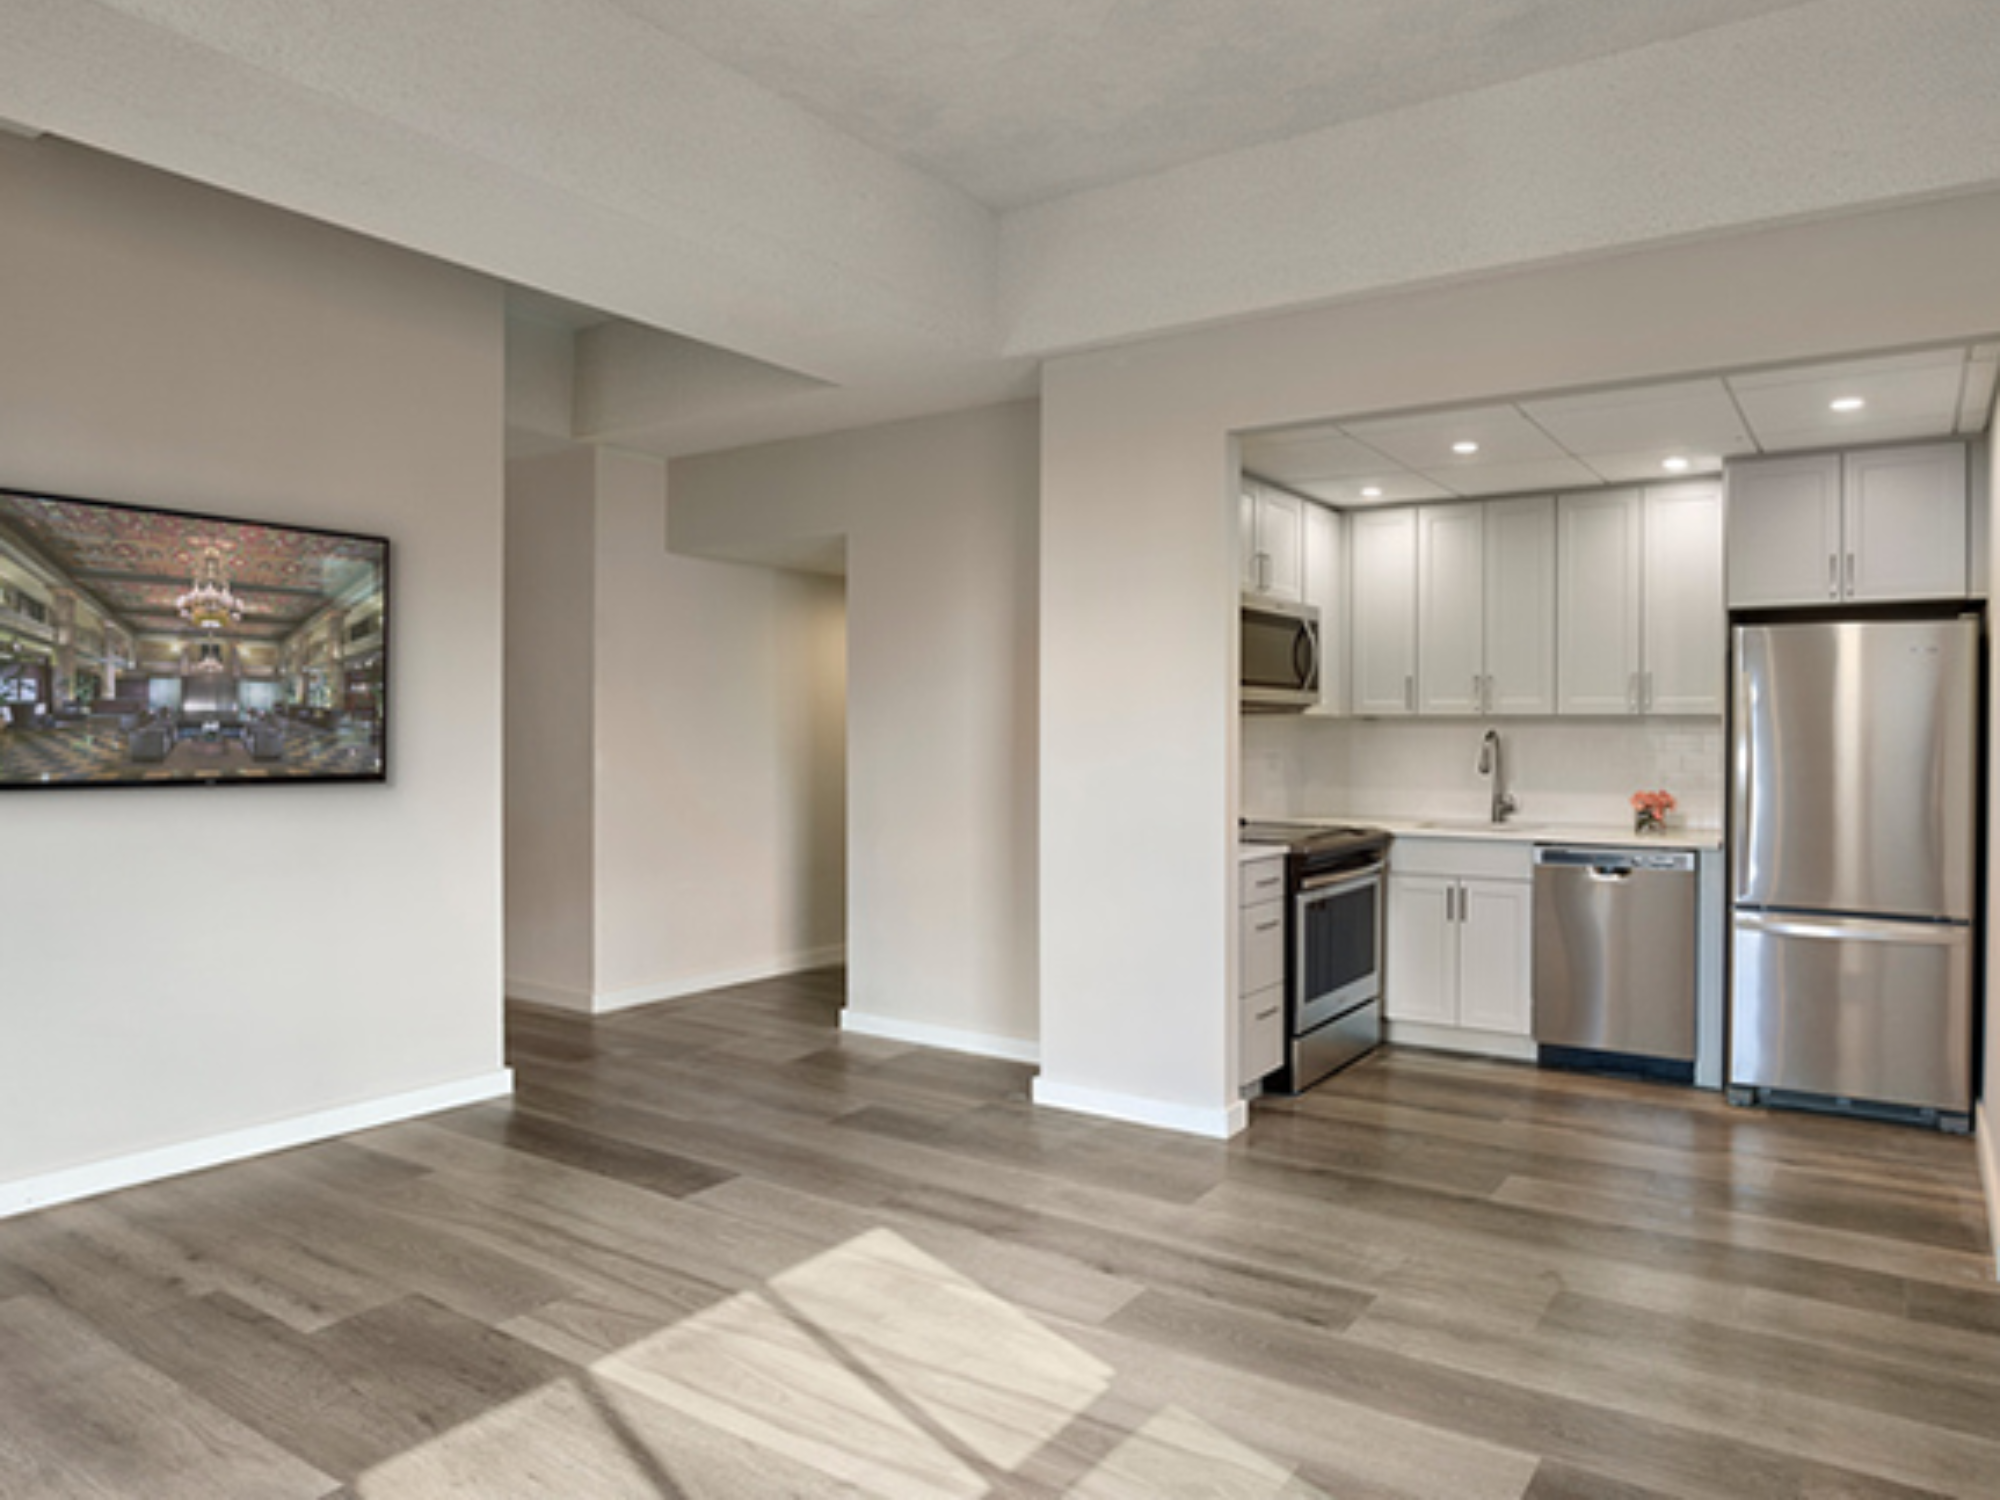 THE FRANKLIN RESIDENCES REVEALS RENOVATED APARTMENTS